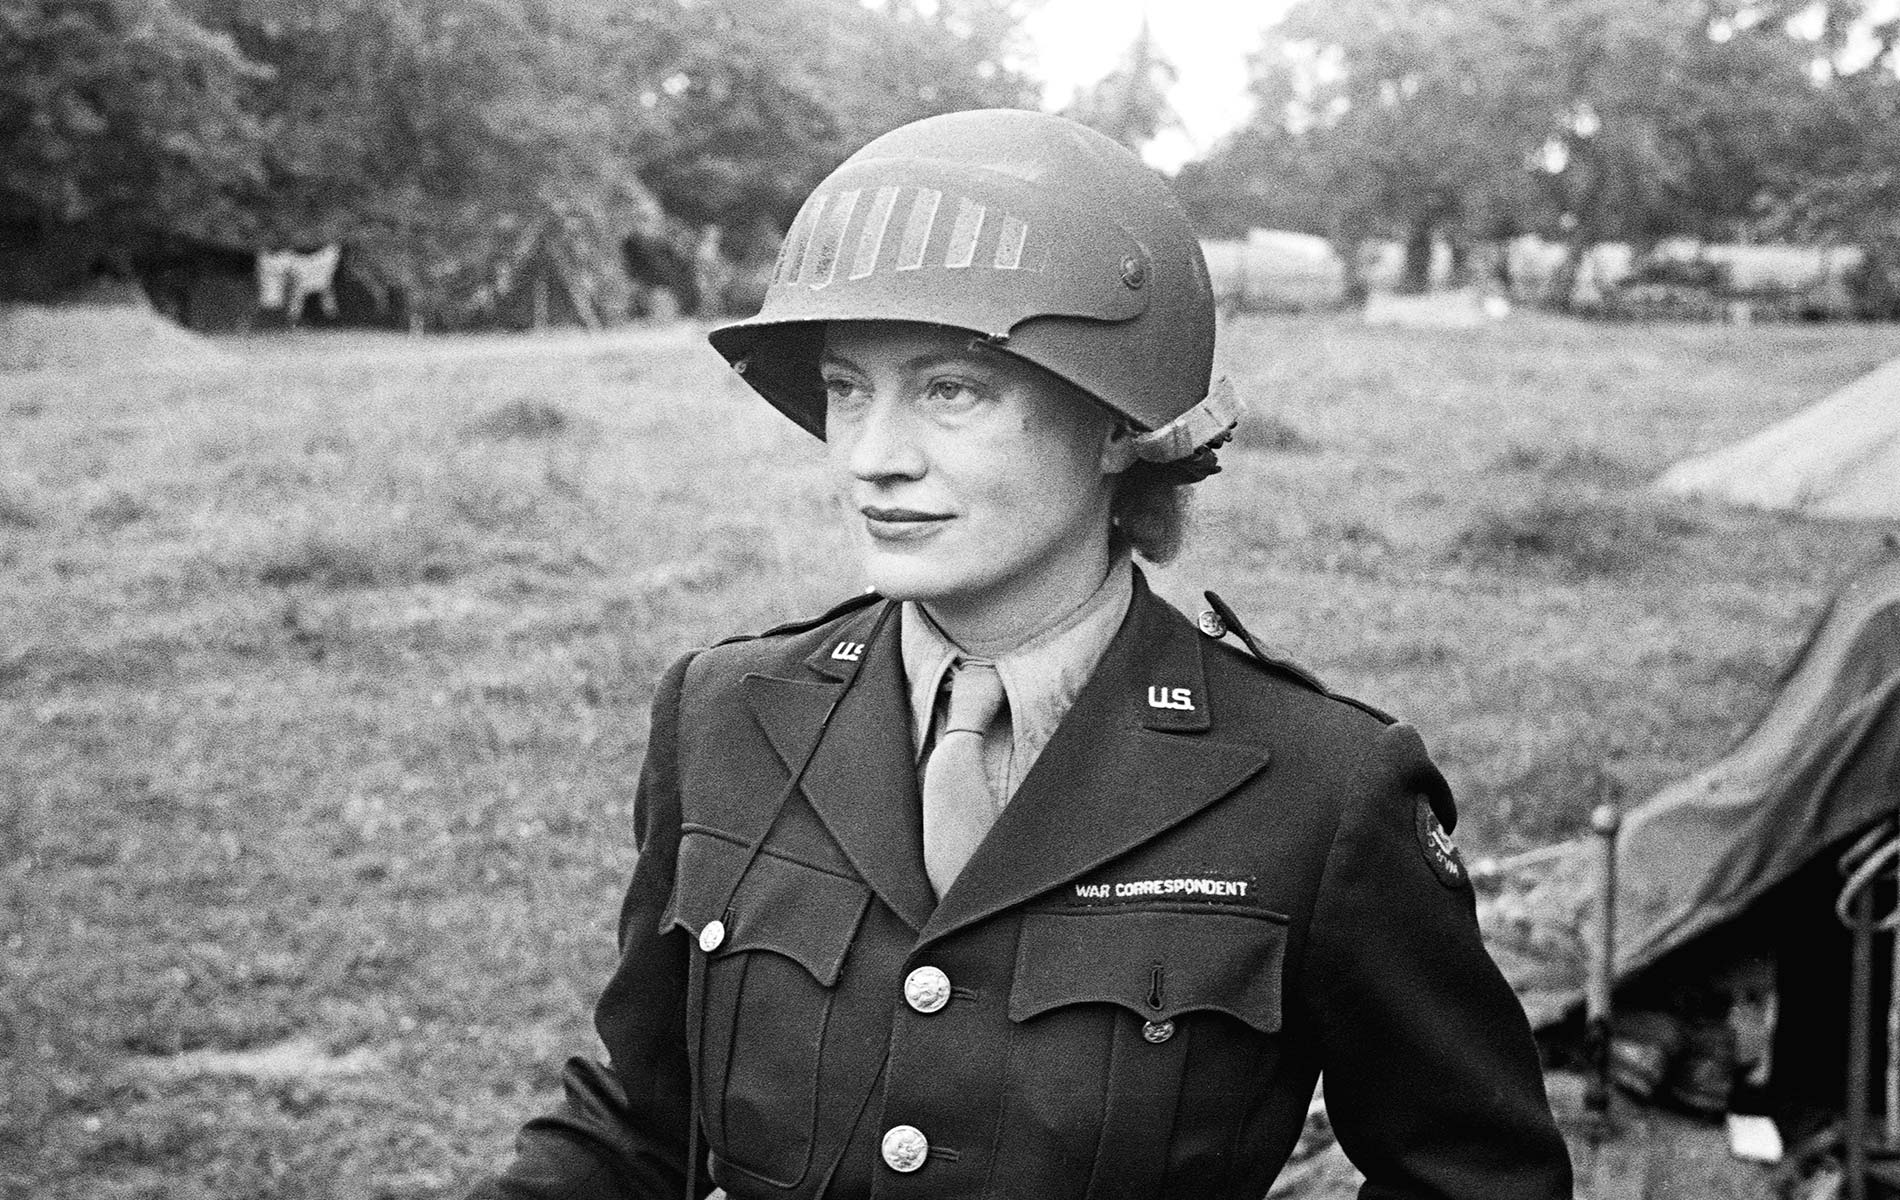 Lee Miller in steel helmet specially designed for using a camera, Normandy, France 1944